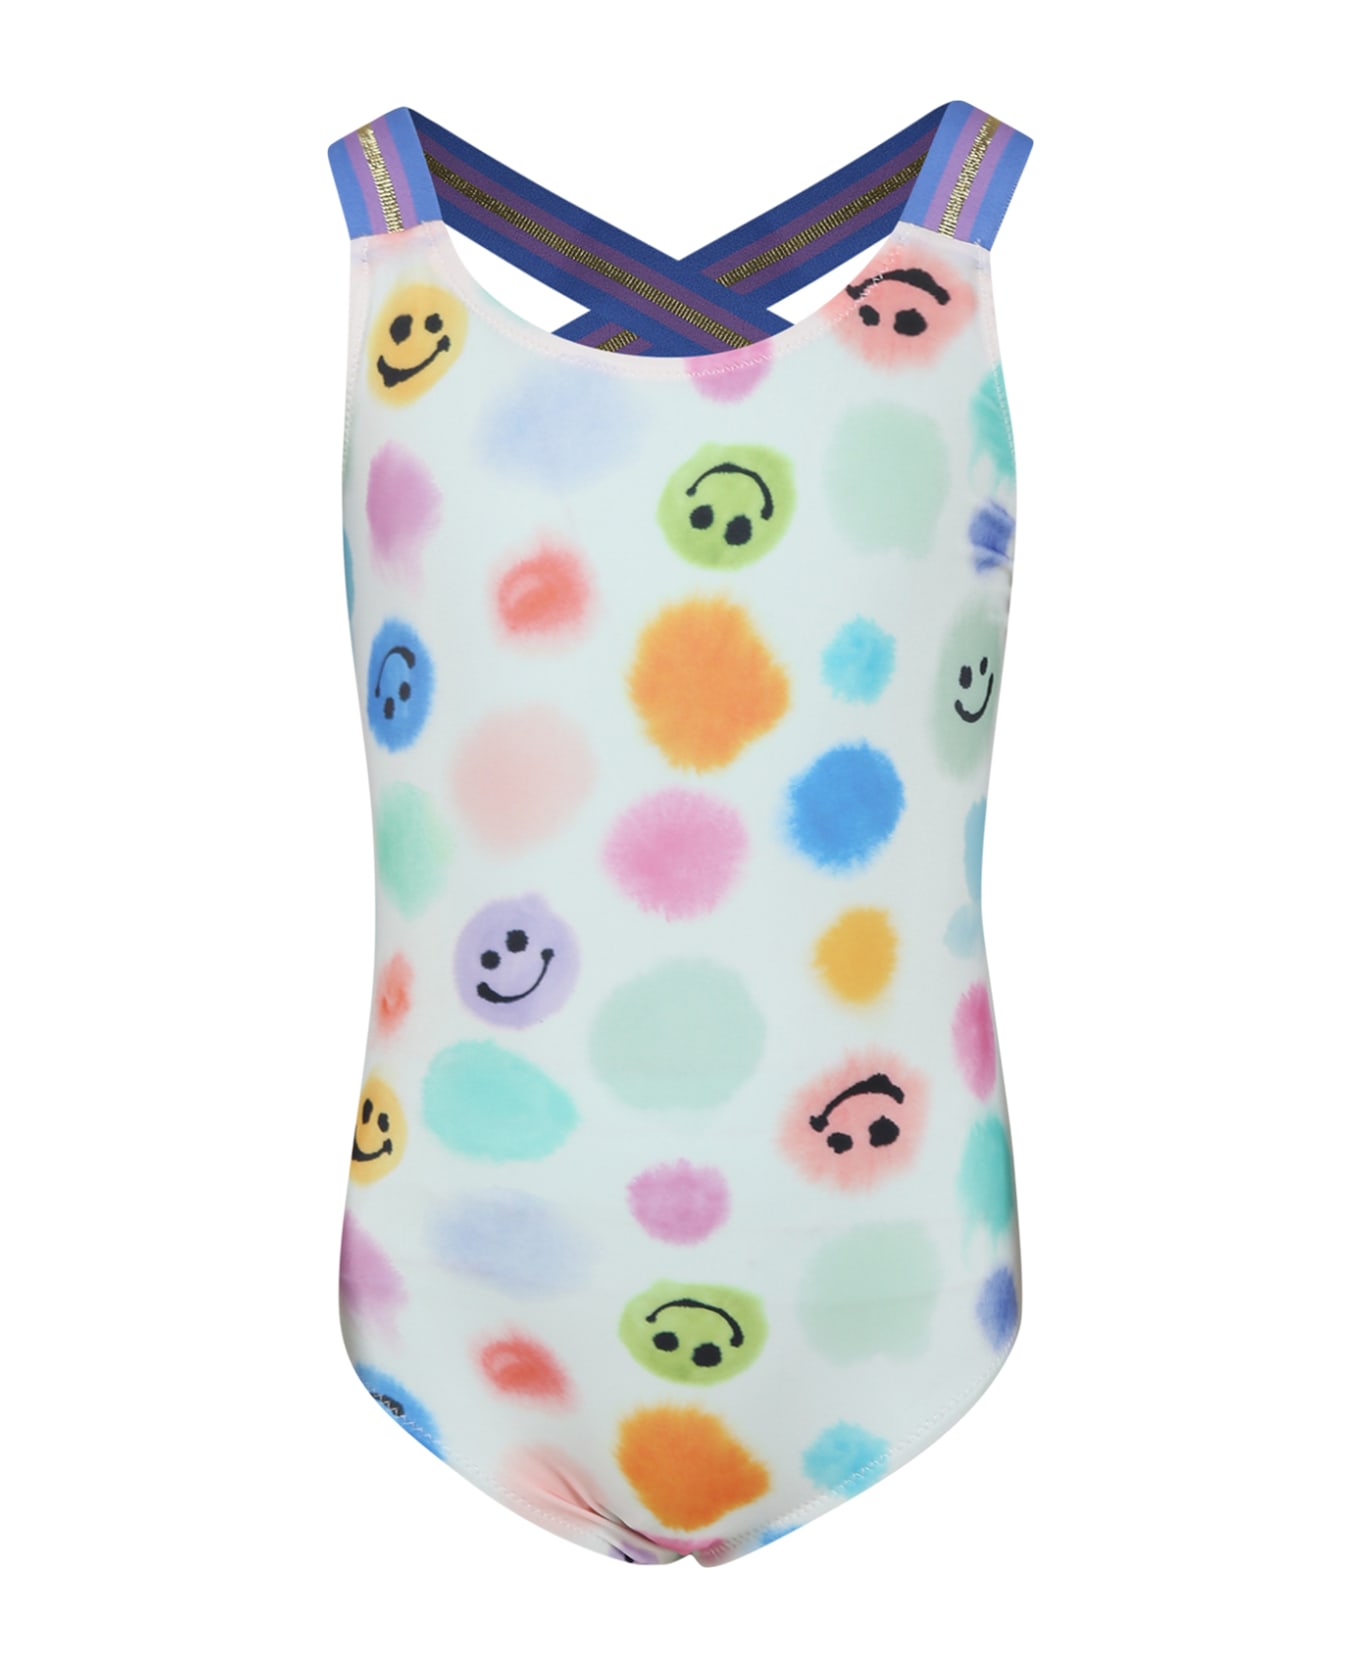 Molo White Swimsuit For Girl With Polka Dots And Smiley - Multicolor 水着